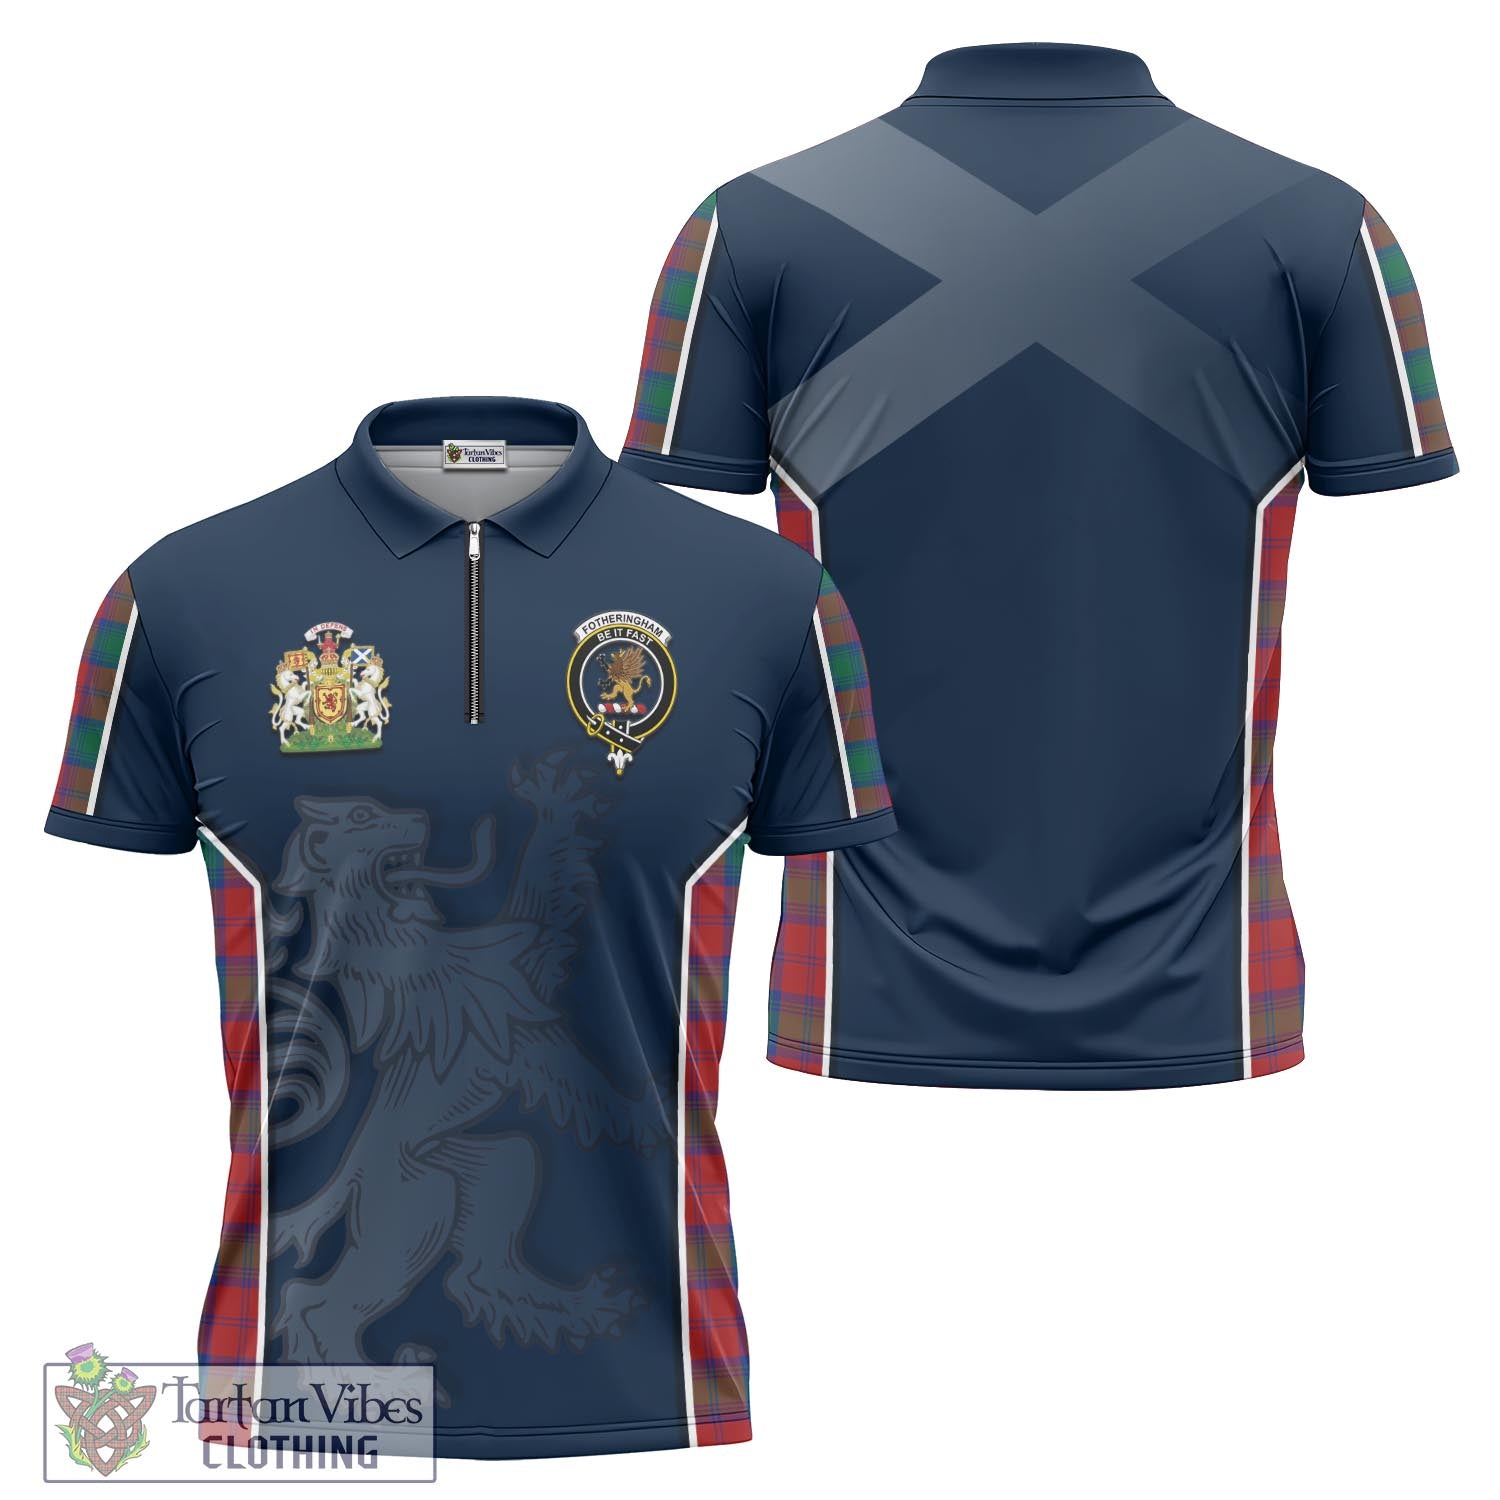 Tartan Vibes Clothing Fotheringham Modern Tartan Zipper Polo Shirt with Family Crest and Lion Rampant Vibes Sport Style